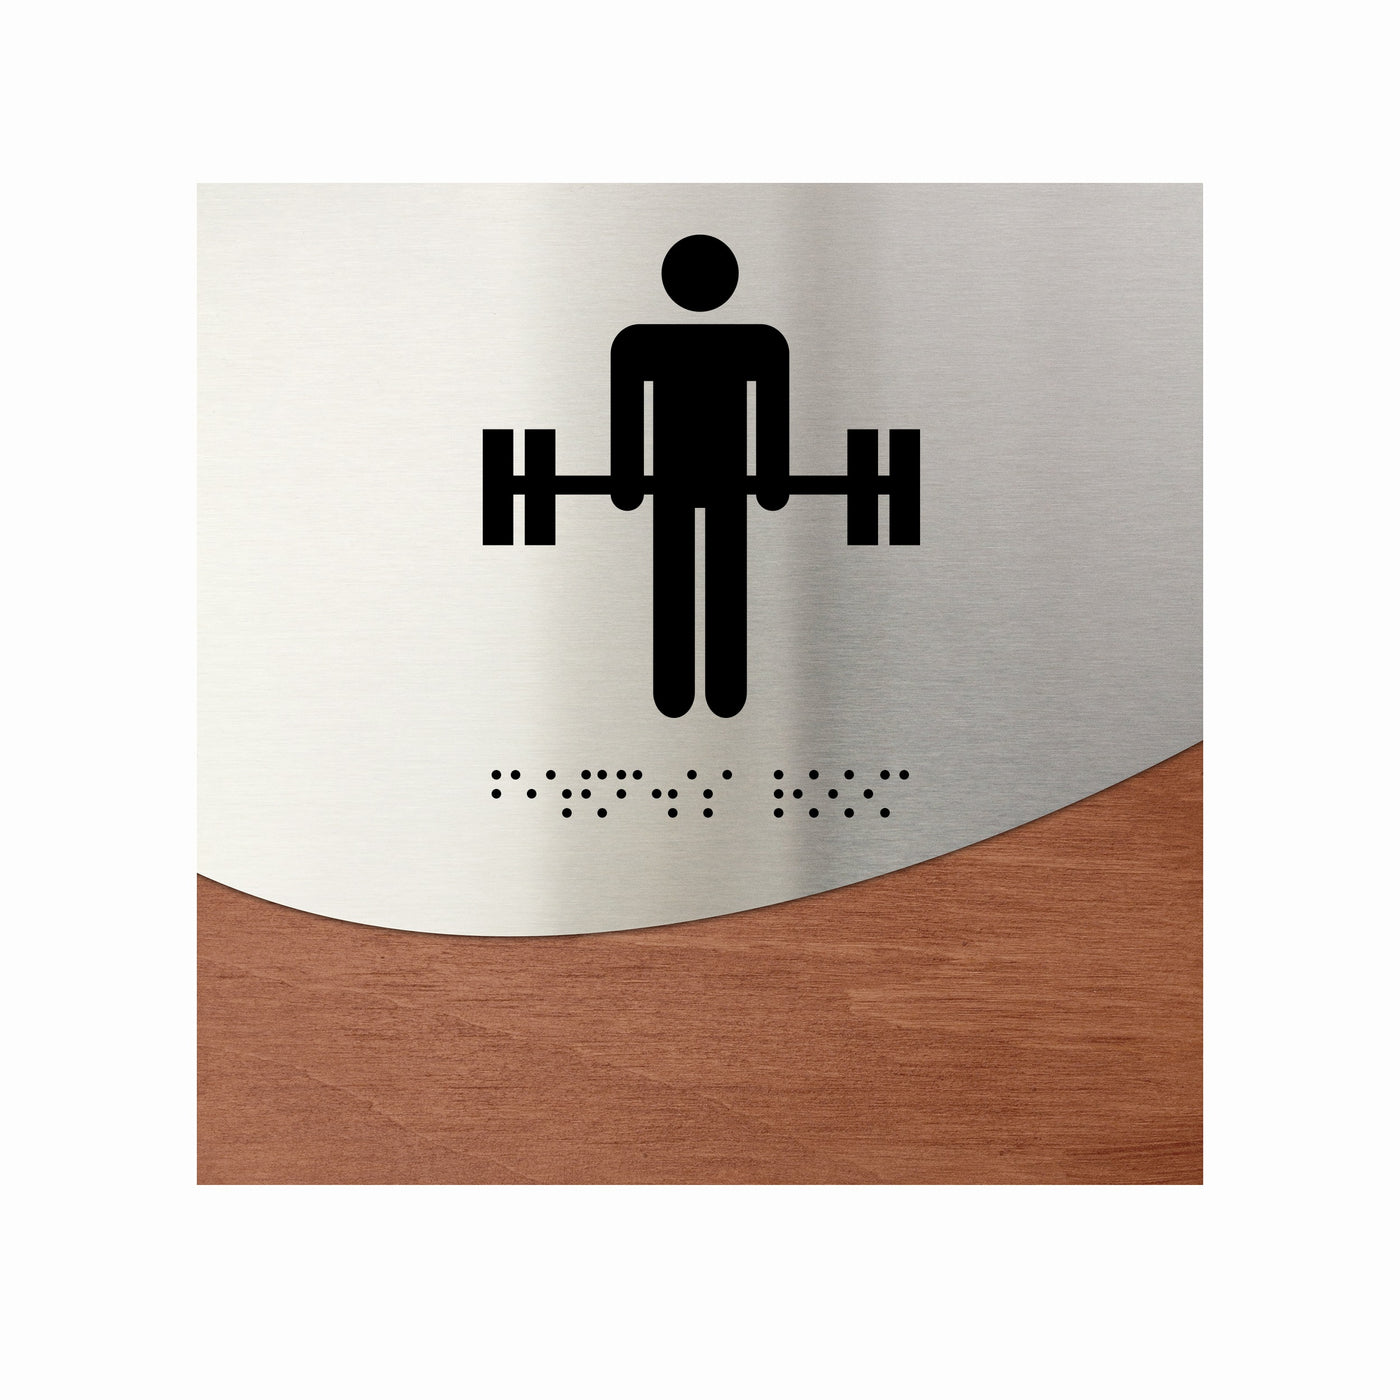 Information Signs - Fitness Room Signs Stainless Steel & Wood "Jure" Design